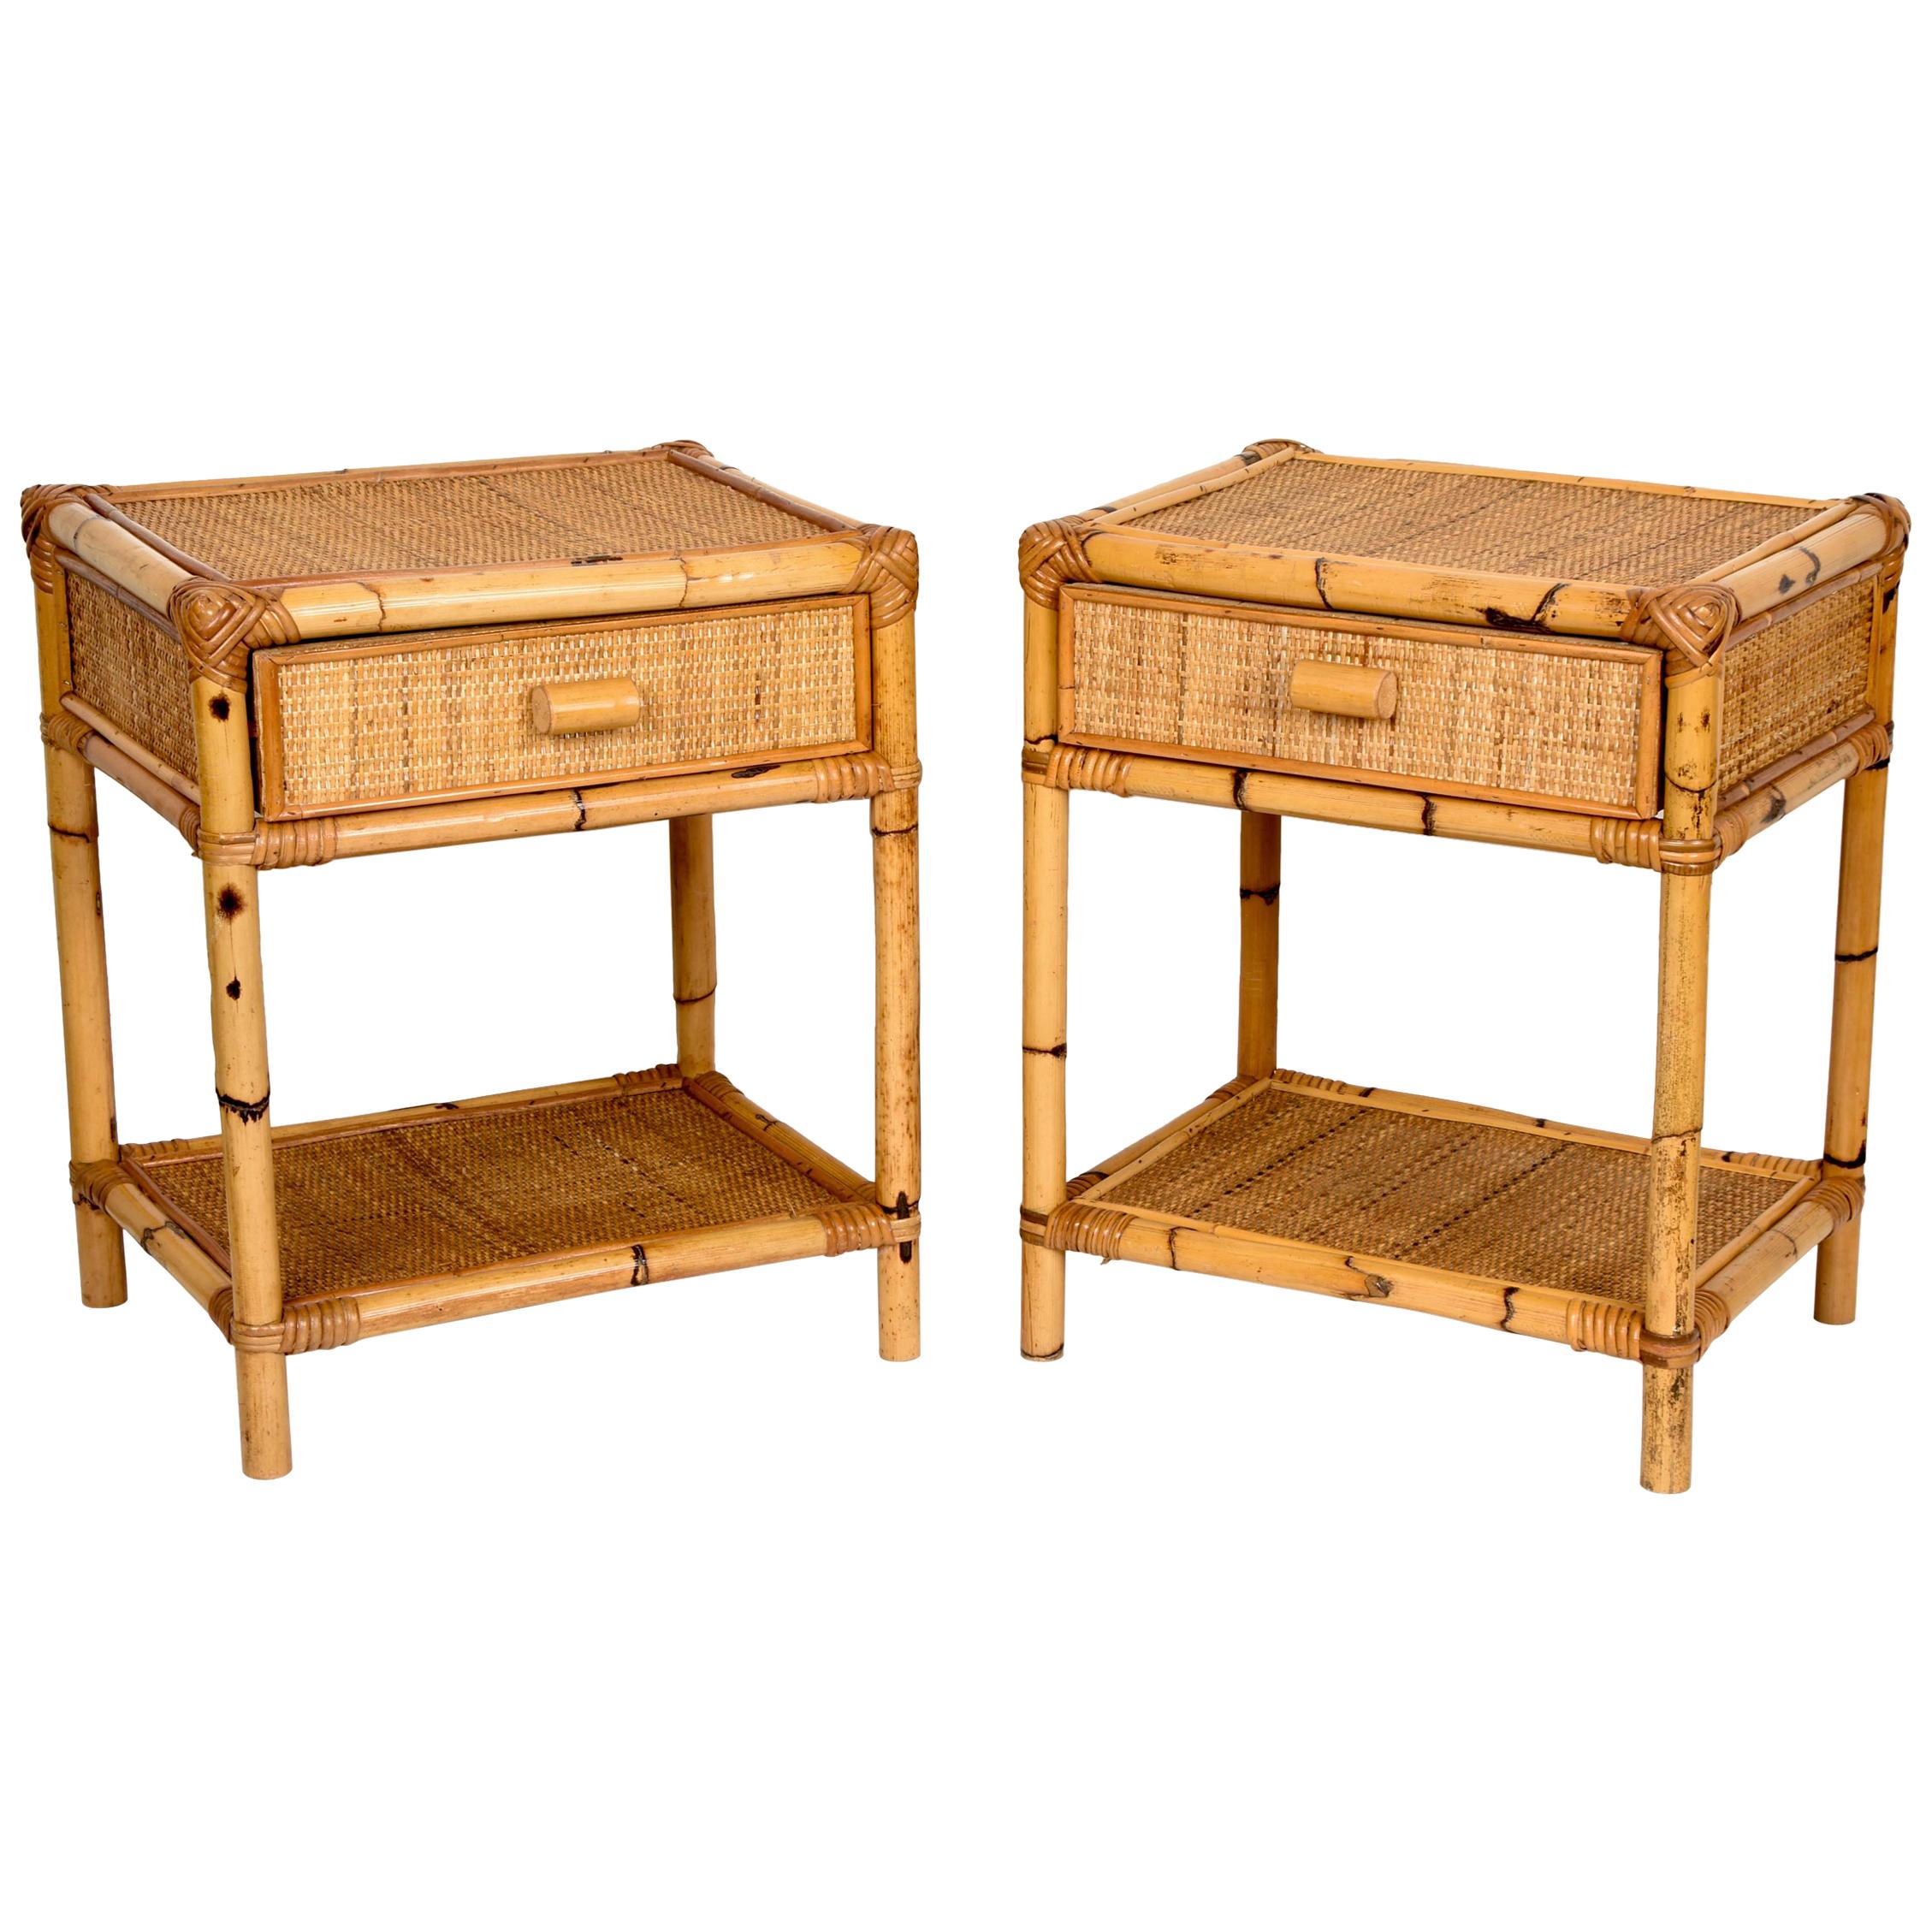 Pair of Mid-Century Modern Bamboo and Rattan Italian Bed Sideboards, 1960s